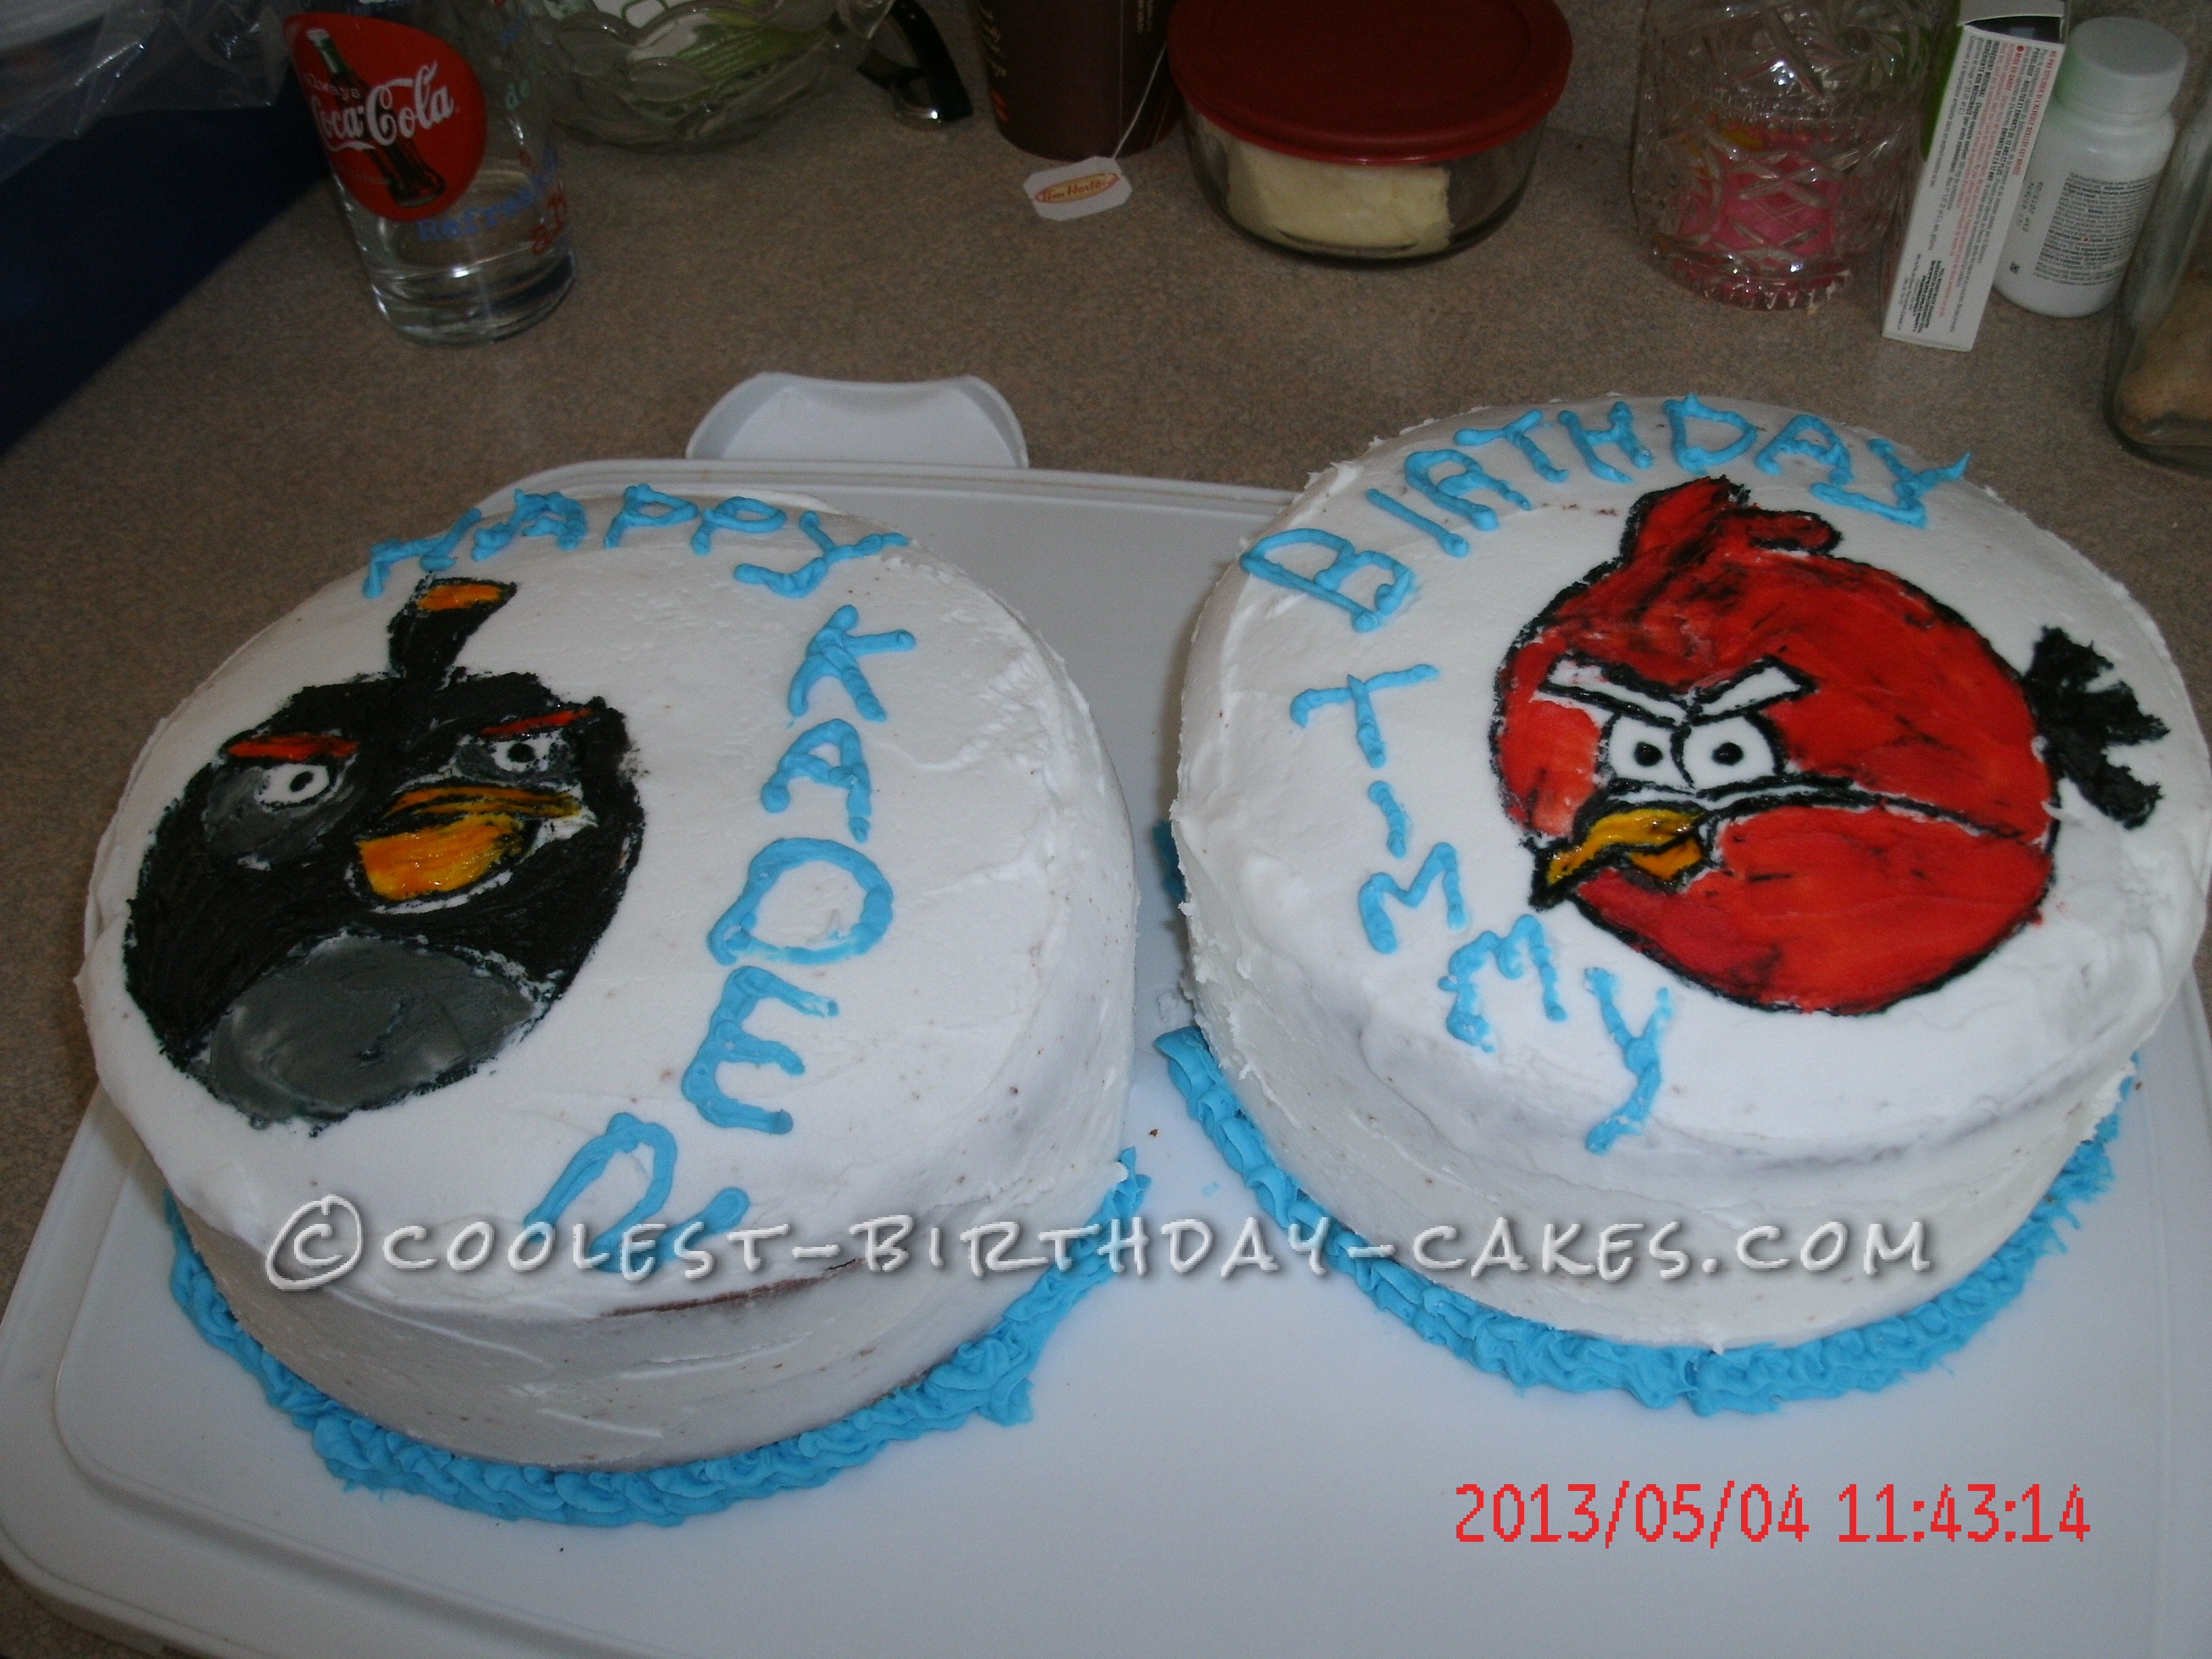 Coolest Angry Birds Cake